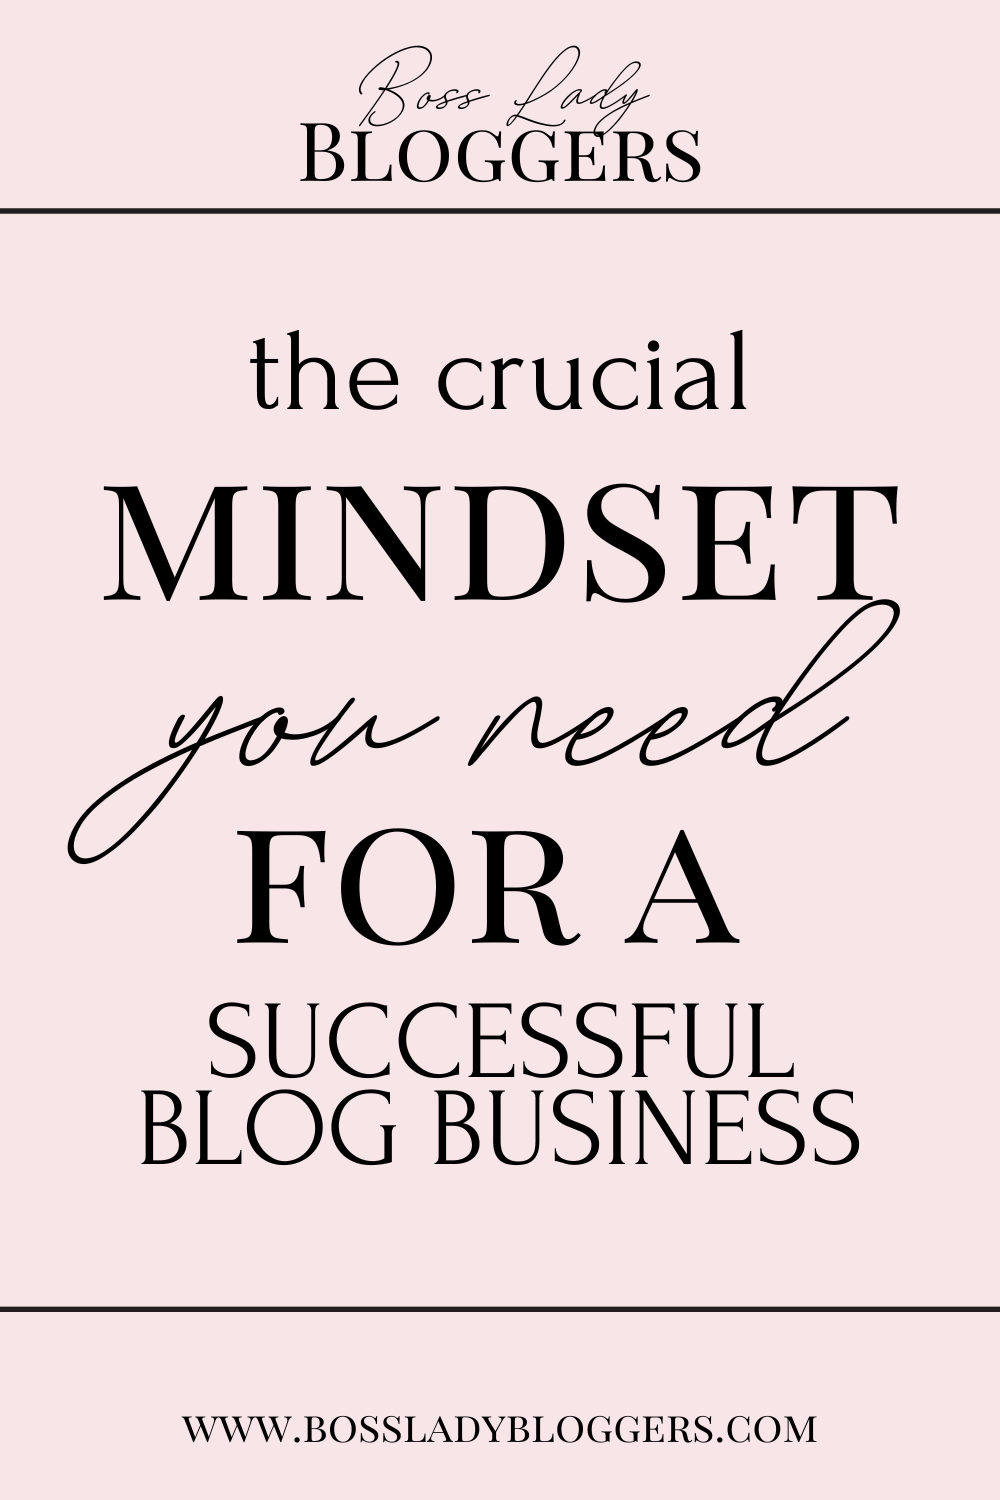 Pink pinterest pin image with a pink background and feminine text that says "the crucial mindset you need for a successful blog business."